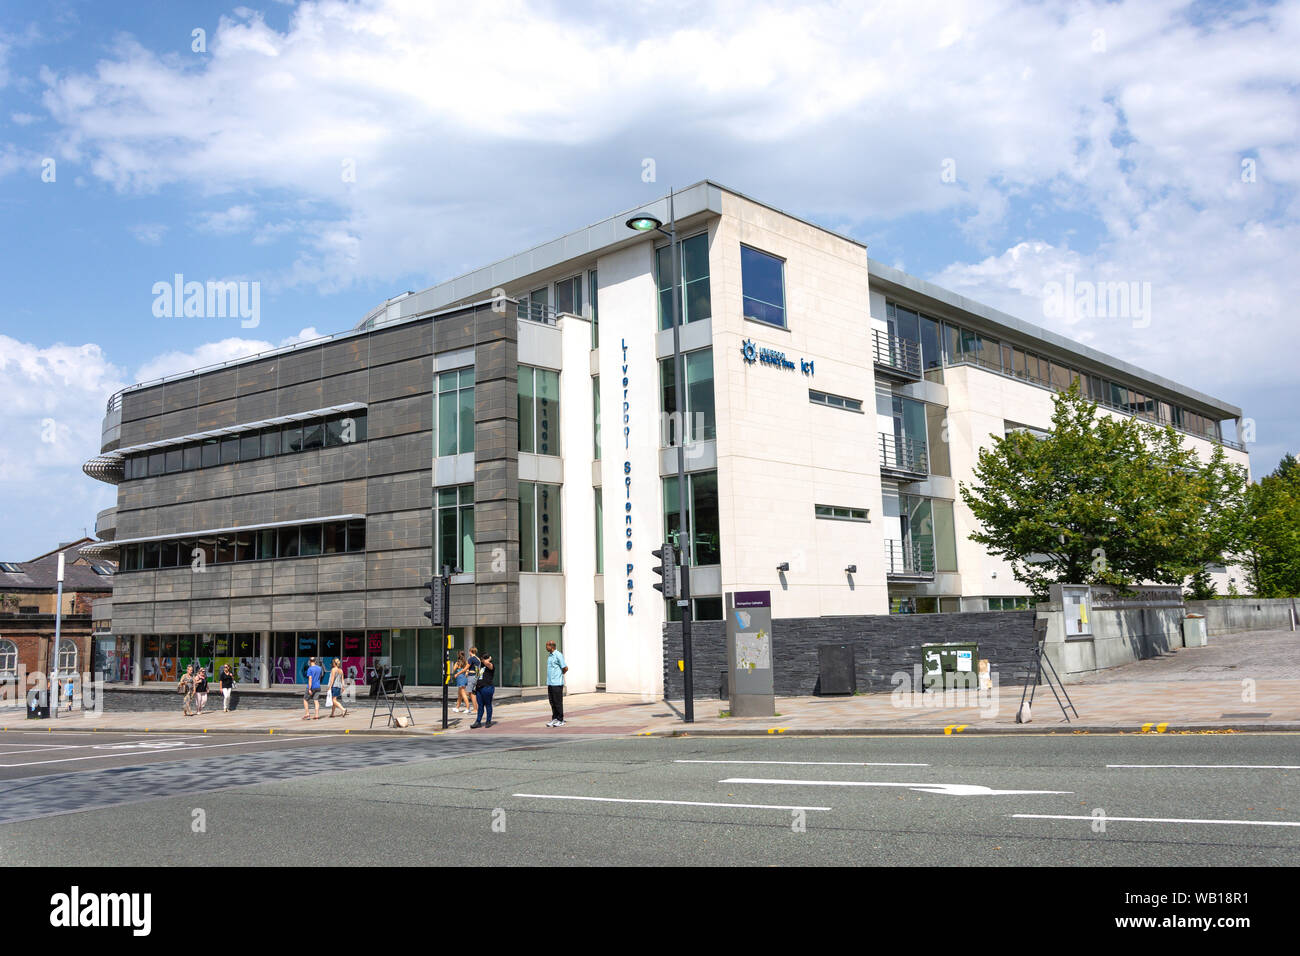 Liverpool Science Park IC1 building, Mount Pleasant, Liverpool, Merseyside, England, United Kingdom Banque D'Images